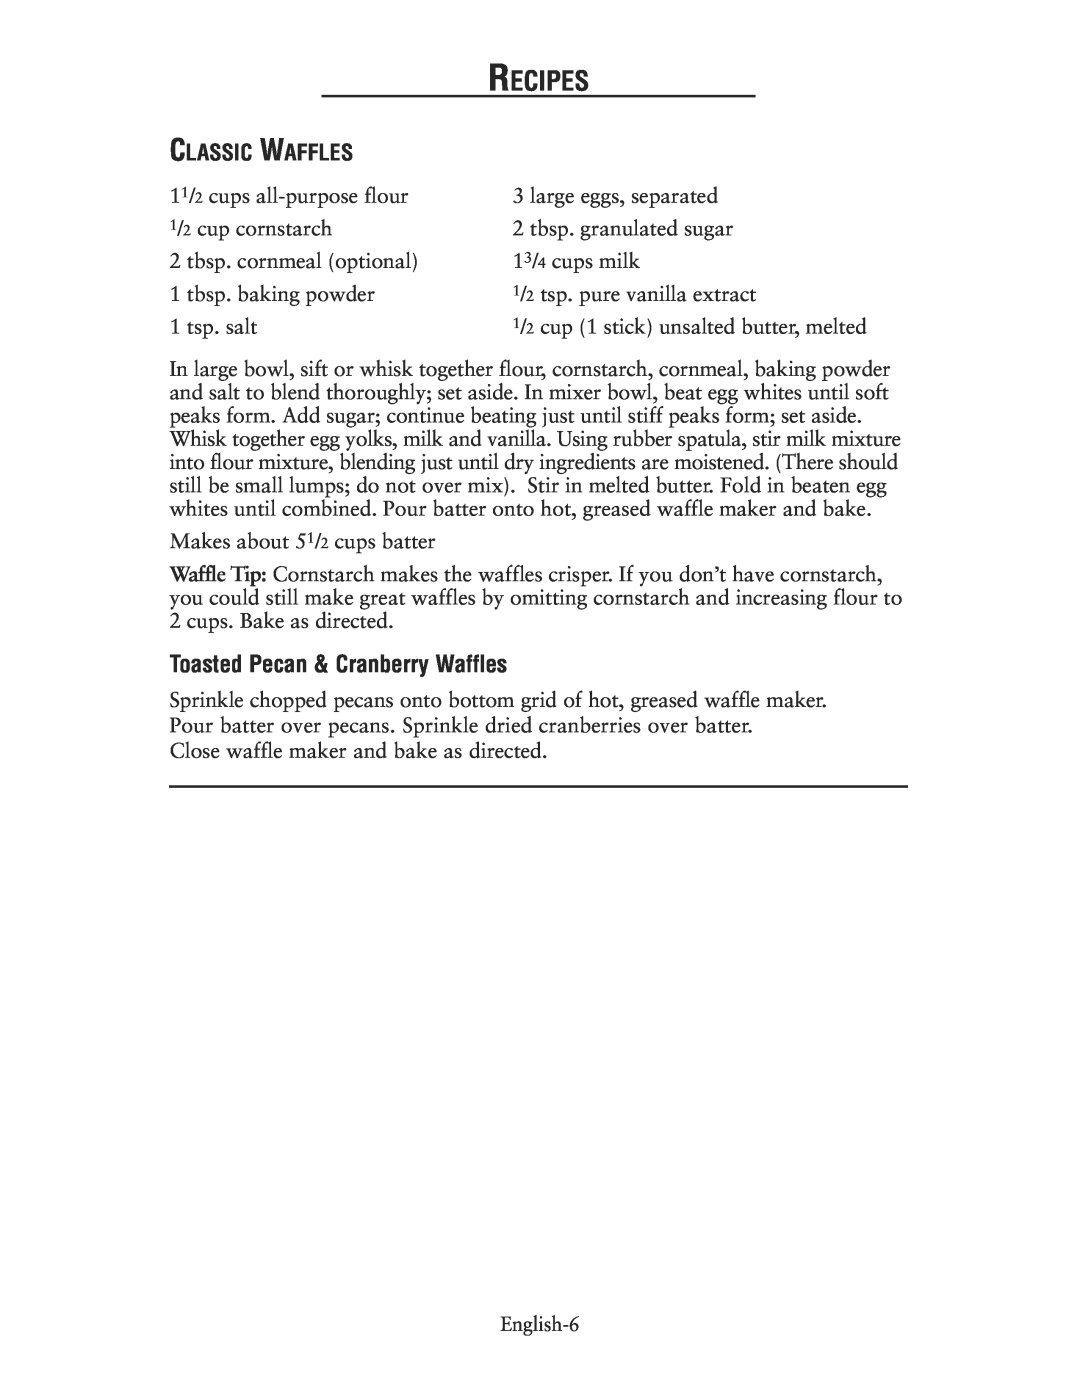 Oster CKSTWFBF10, 135018 user manual Recipes, Toasted Pecan & Cranberry Waffles, Classic Waffles 